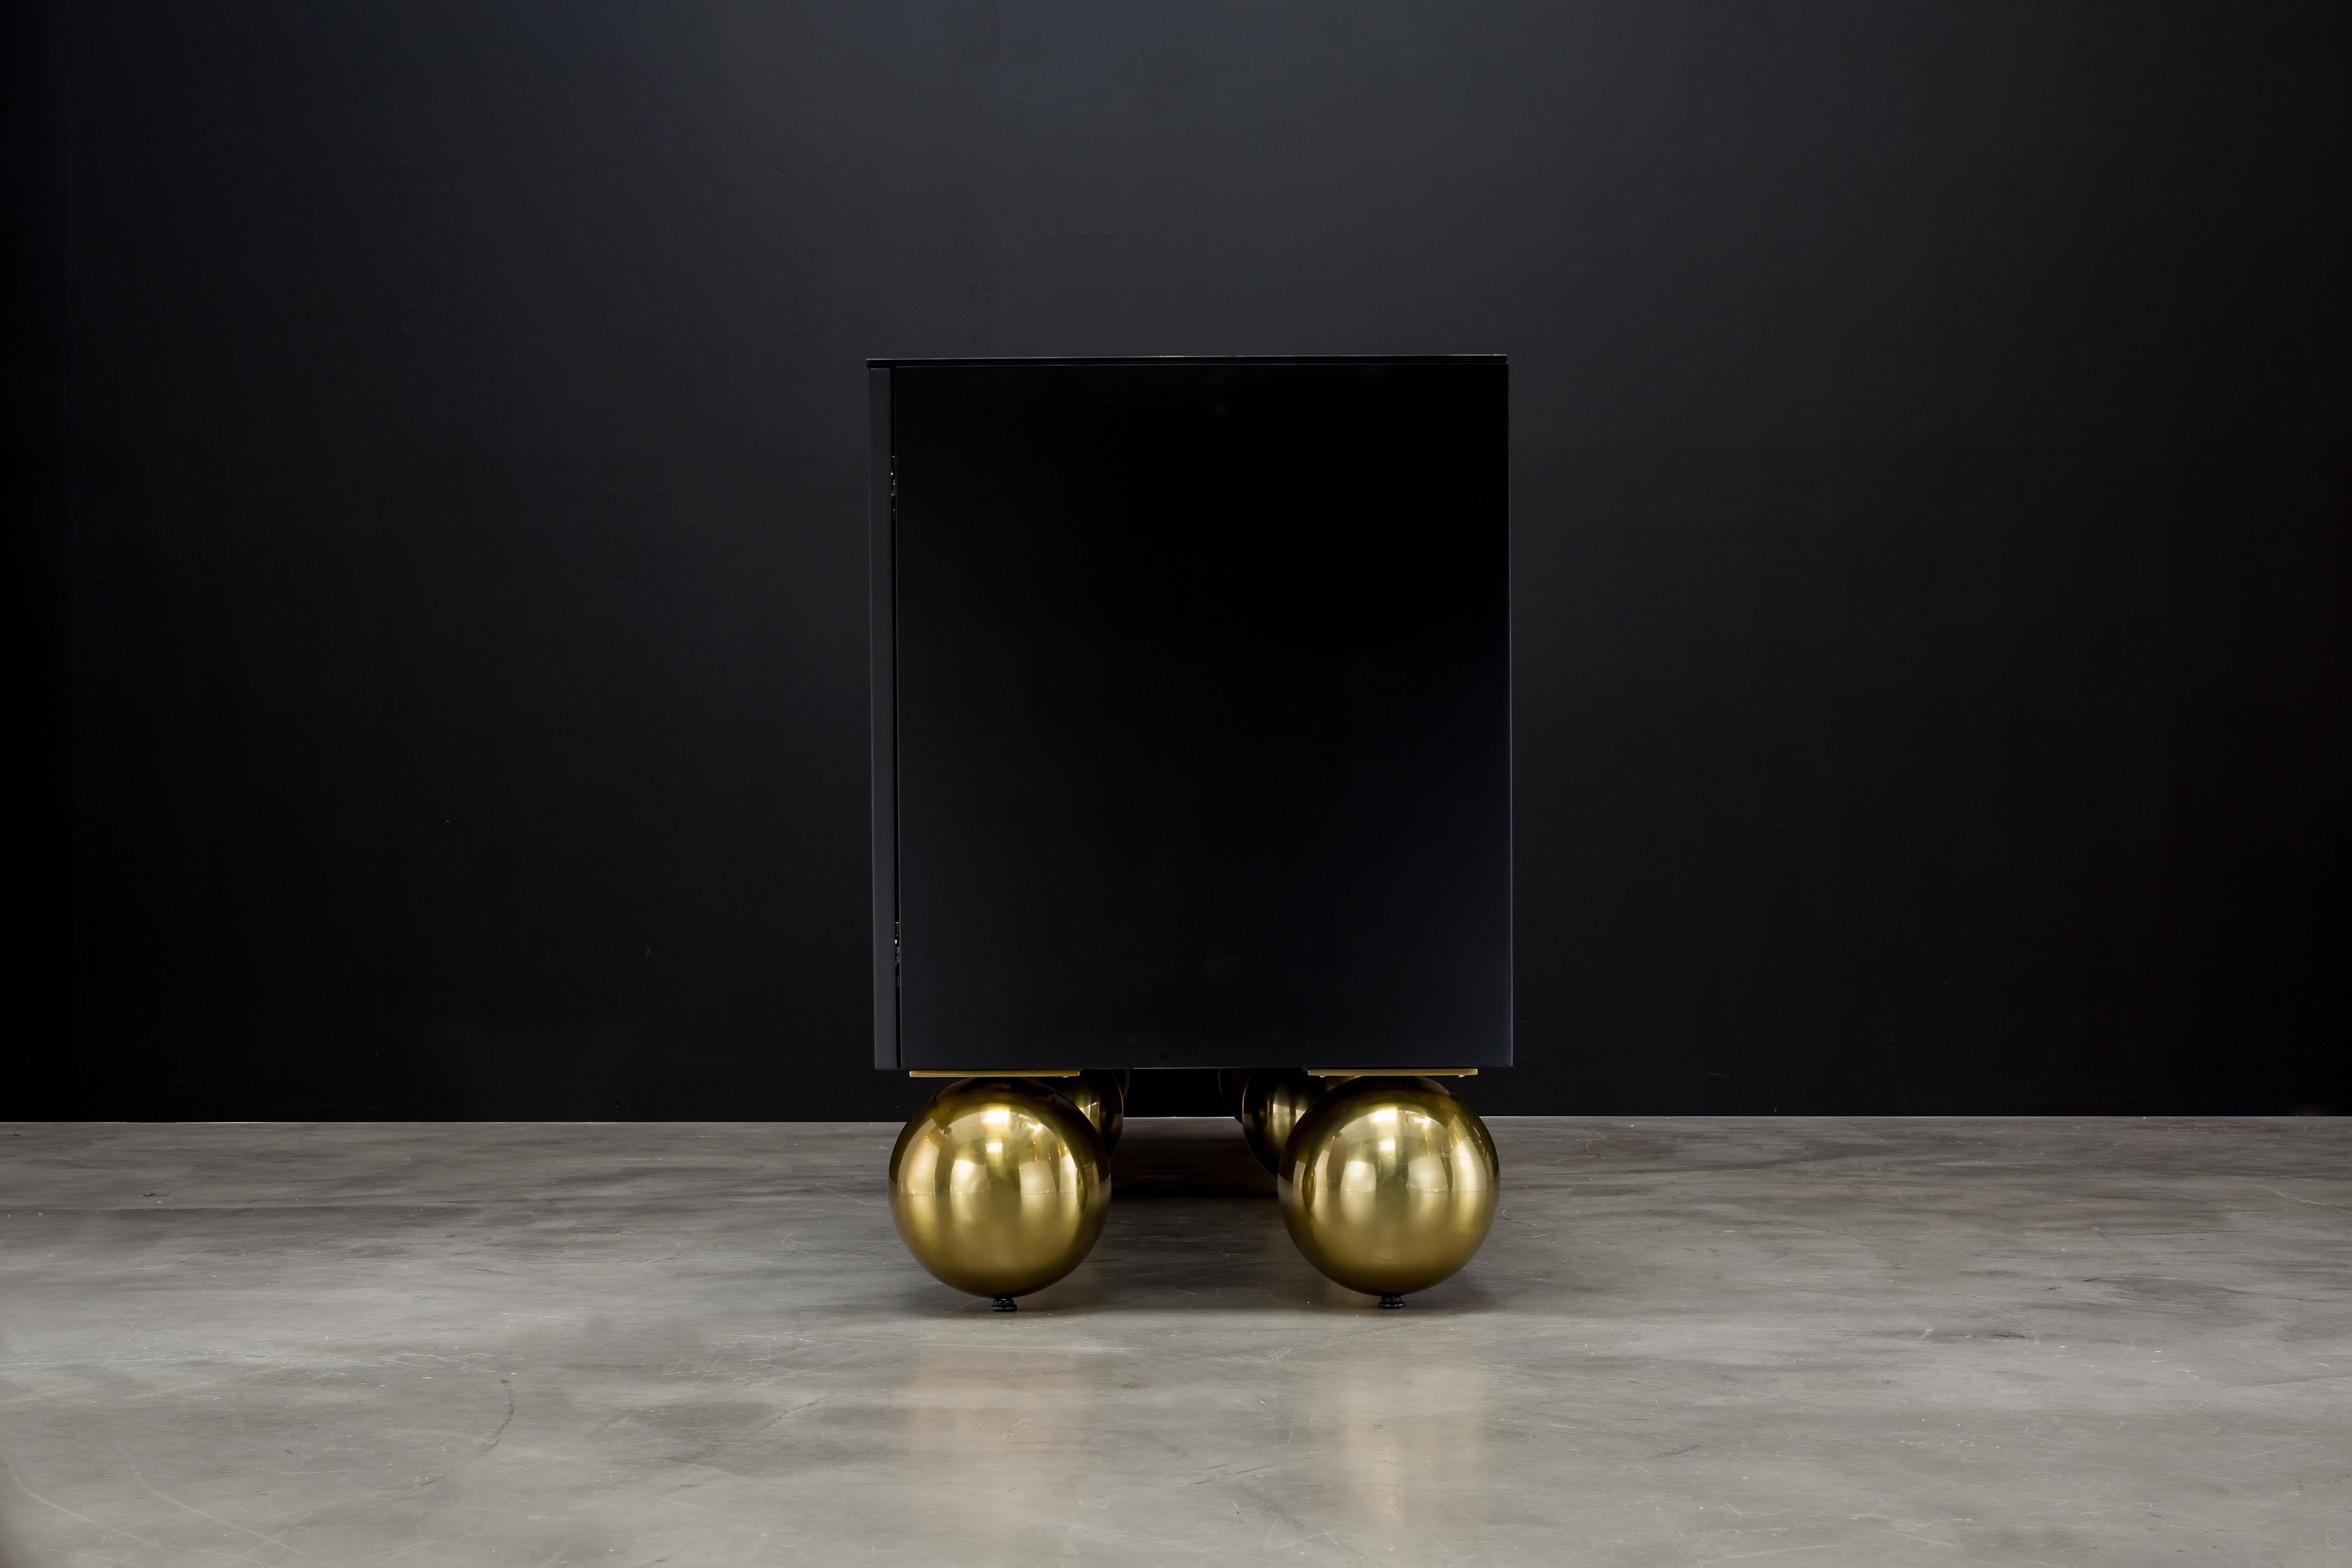 American BALL CREDENZA XTRA - Modern Black Lacquer with Metal Inlay and Metallic Legs